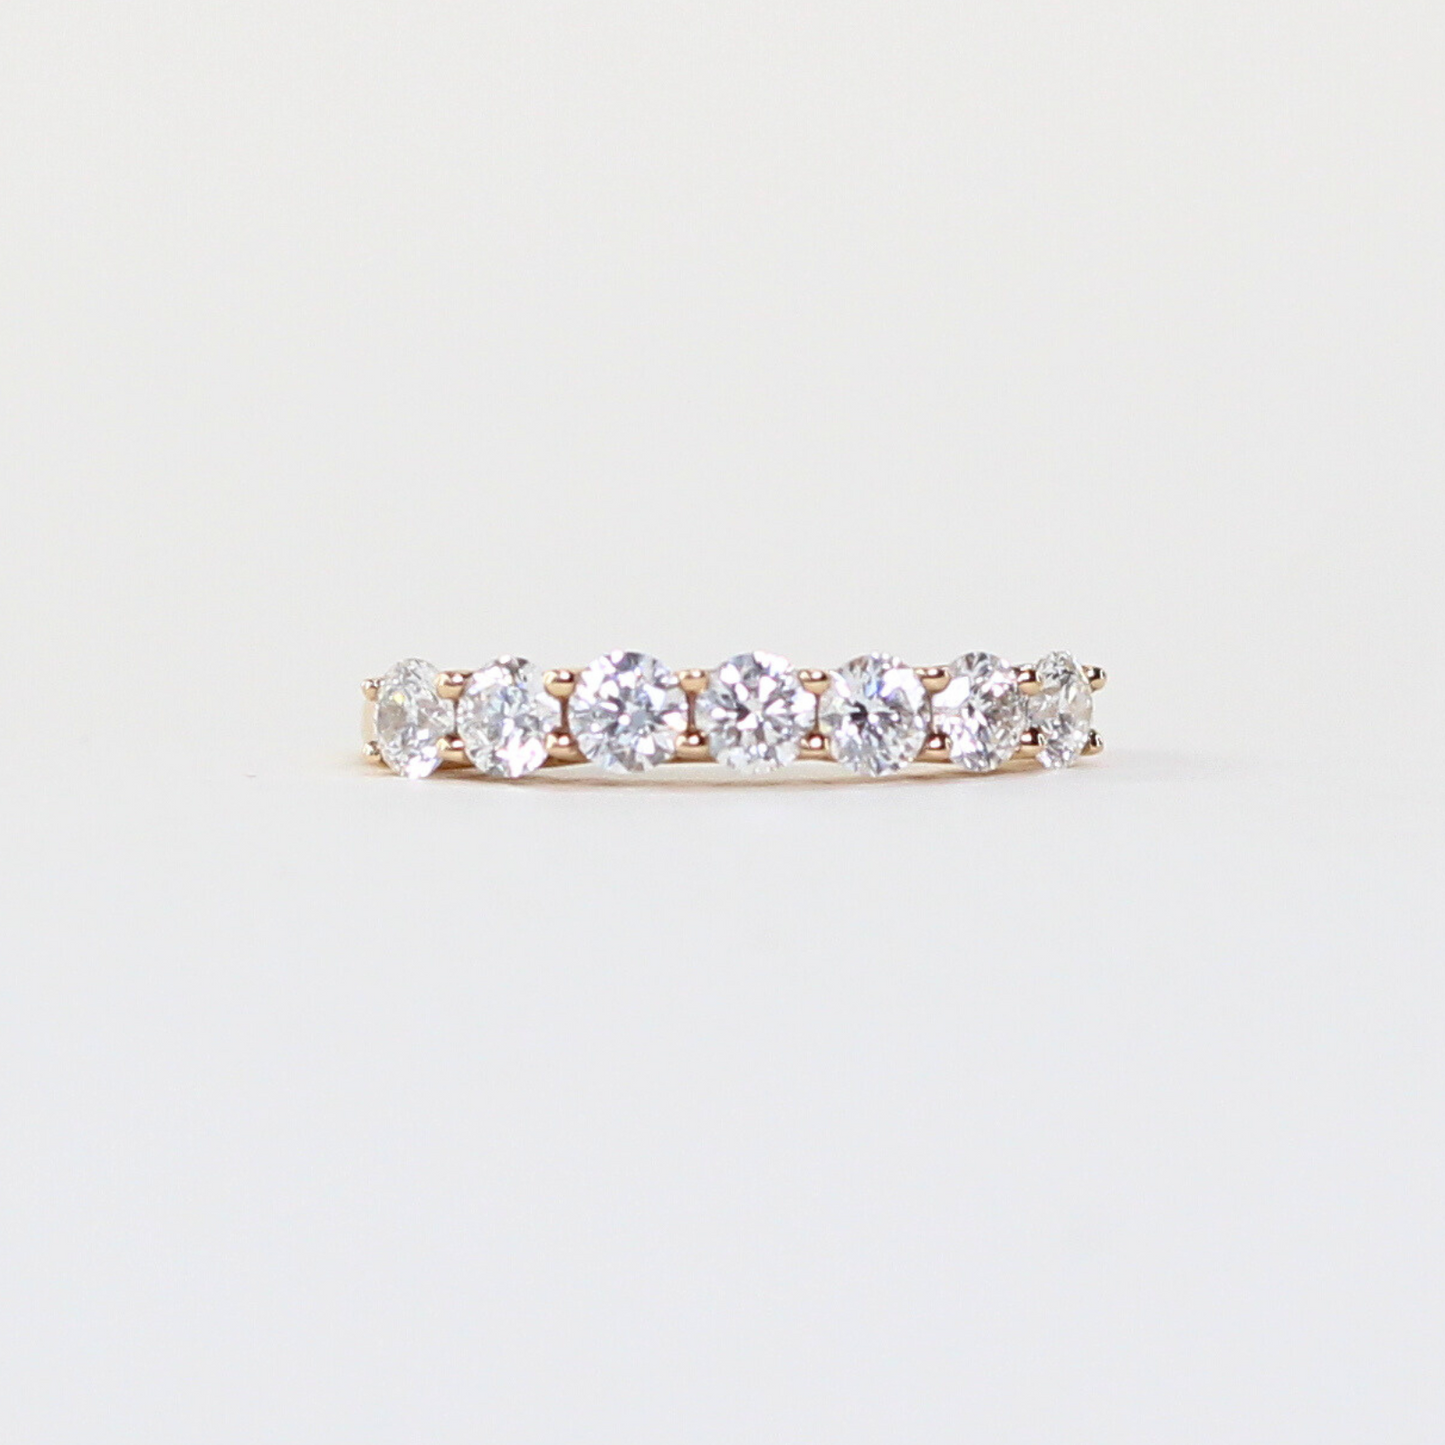 7-stone diamond ring in shared/wave prong setting